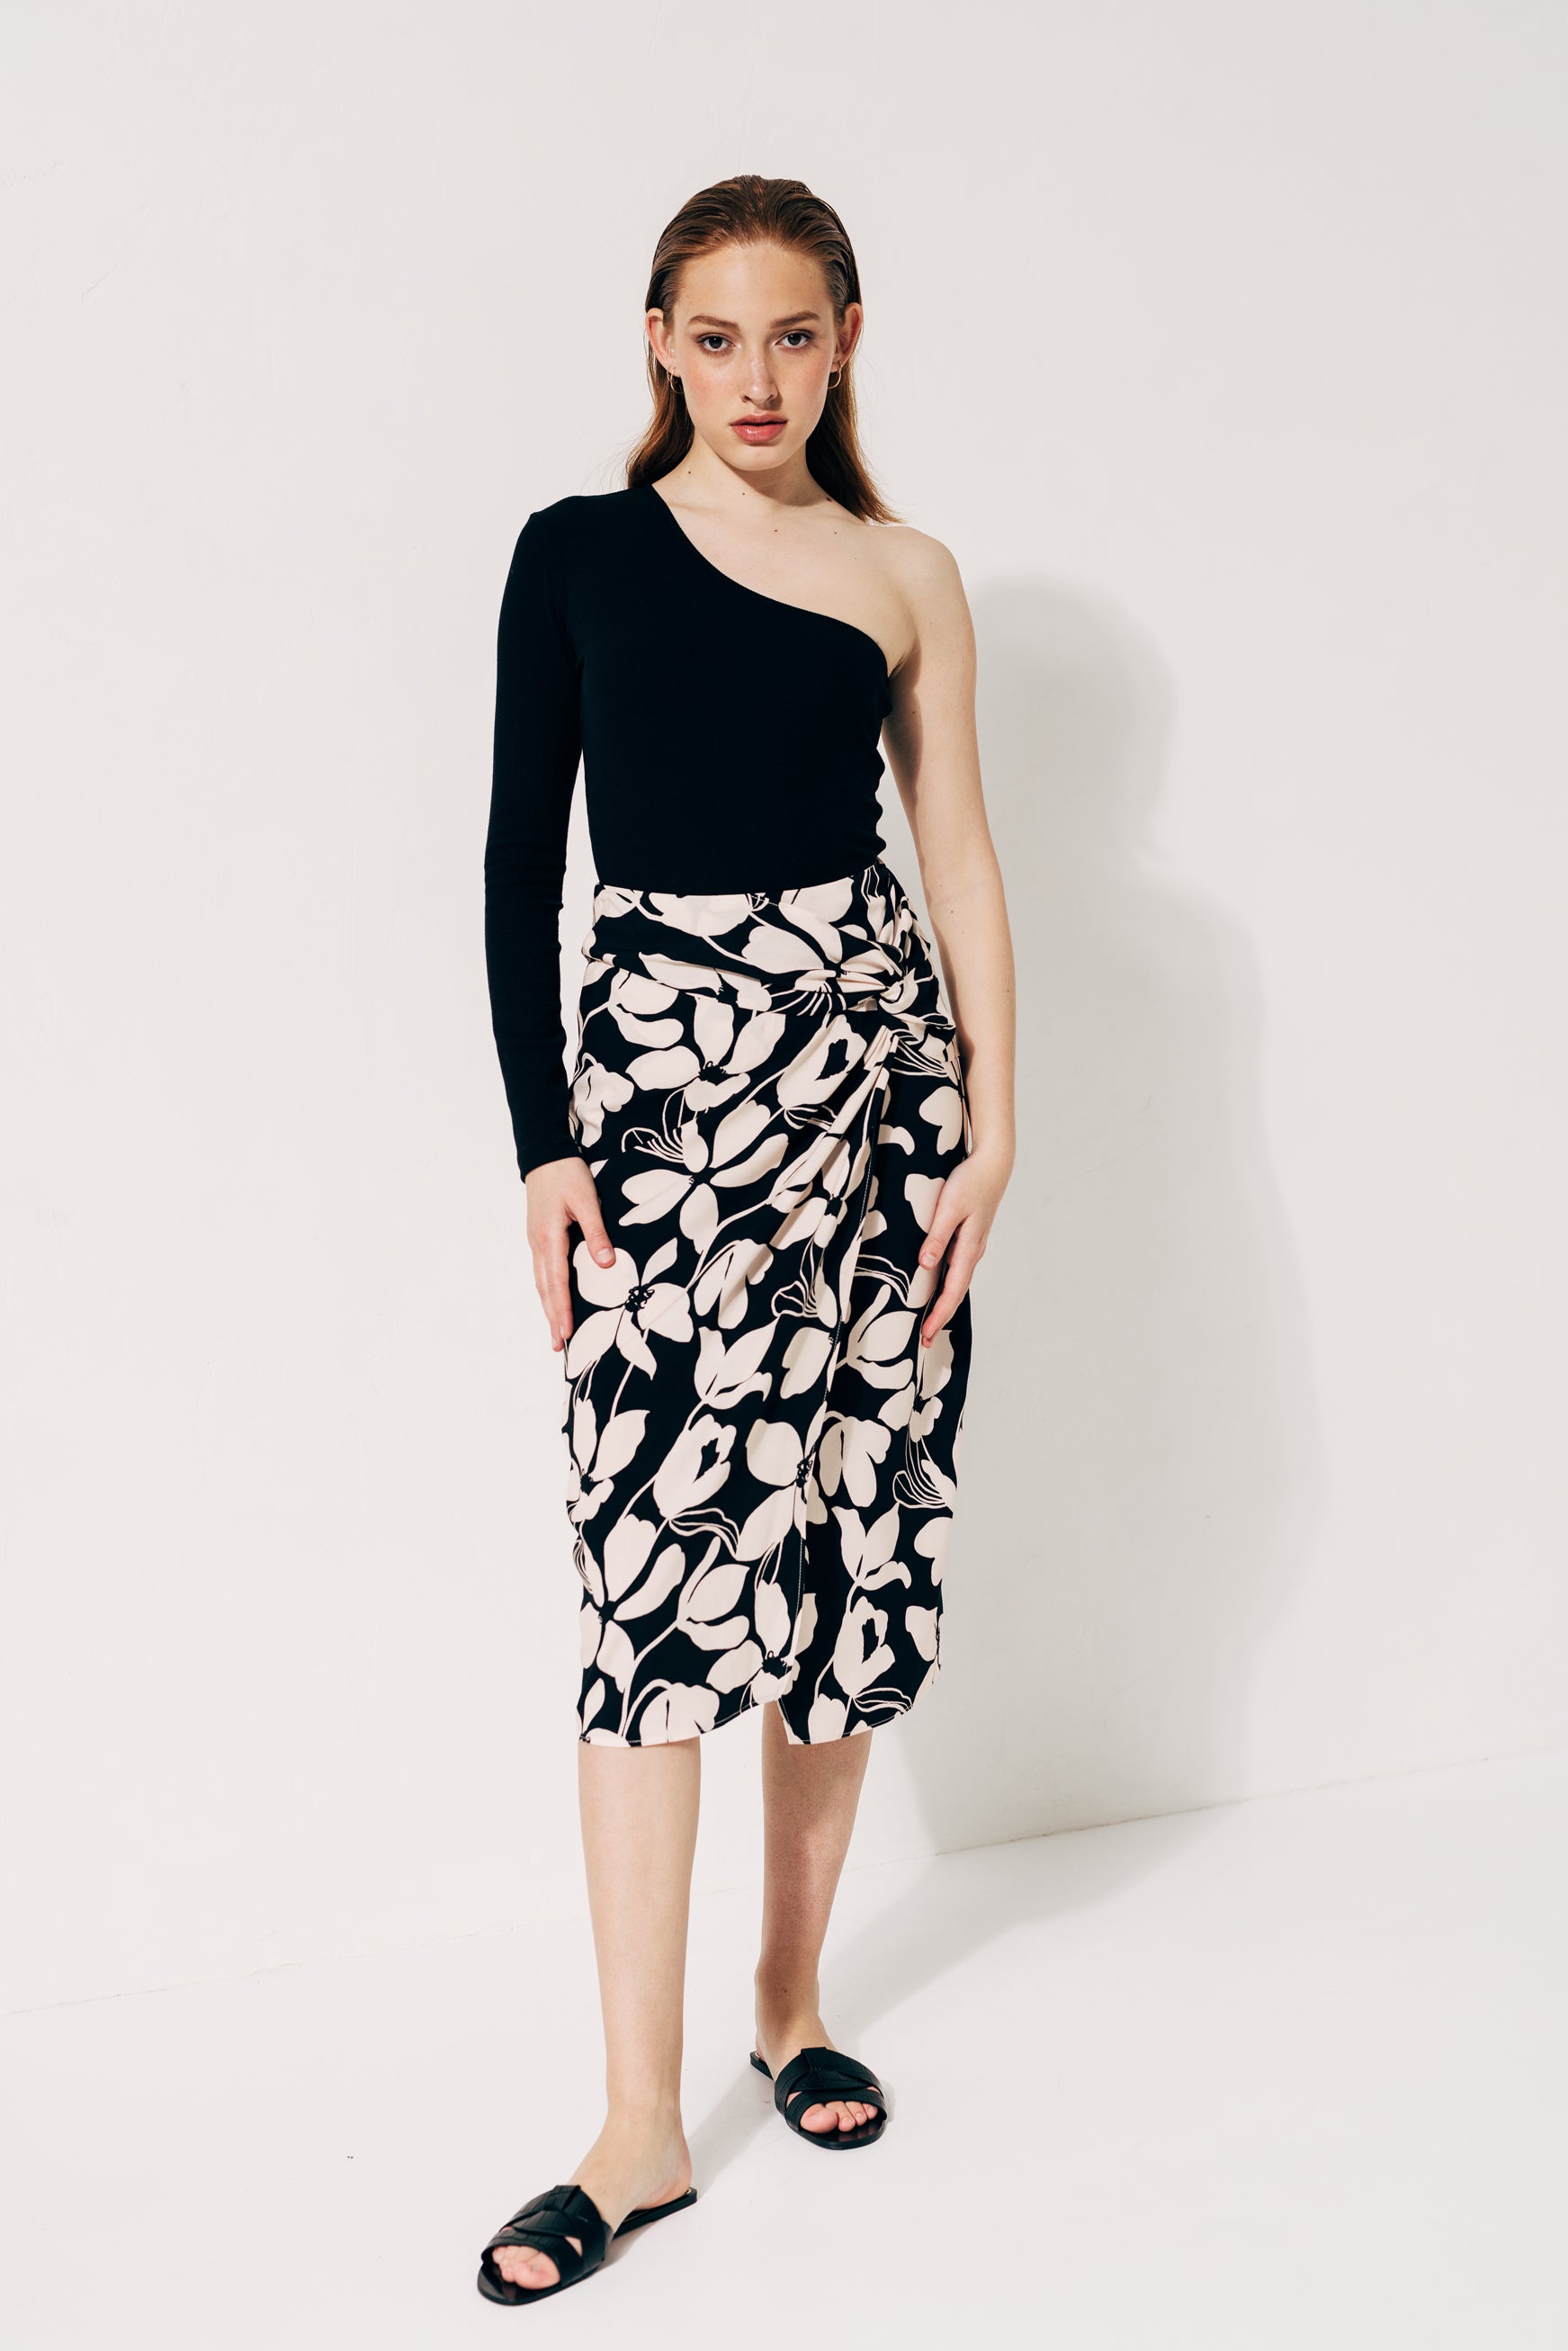 100% Viscose floral print midi skirt with side knot and slit